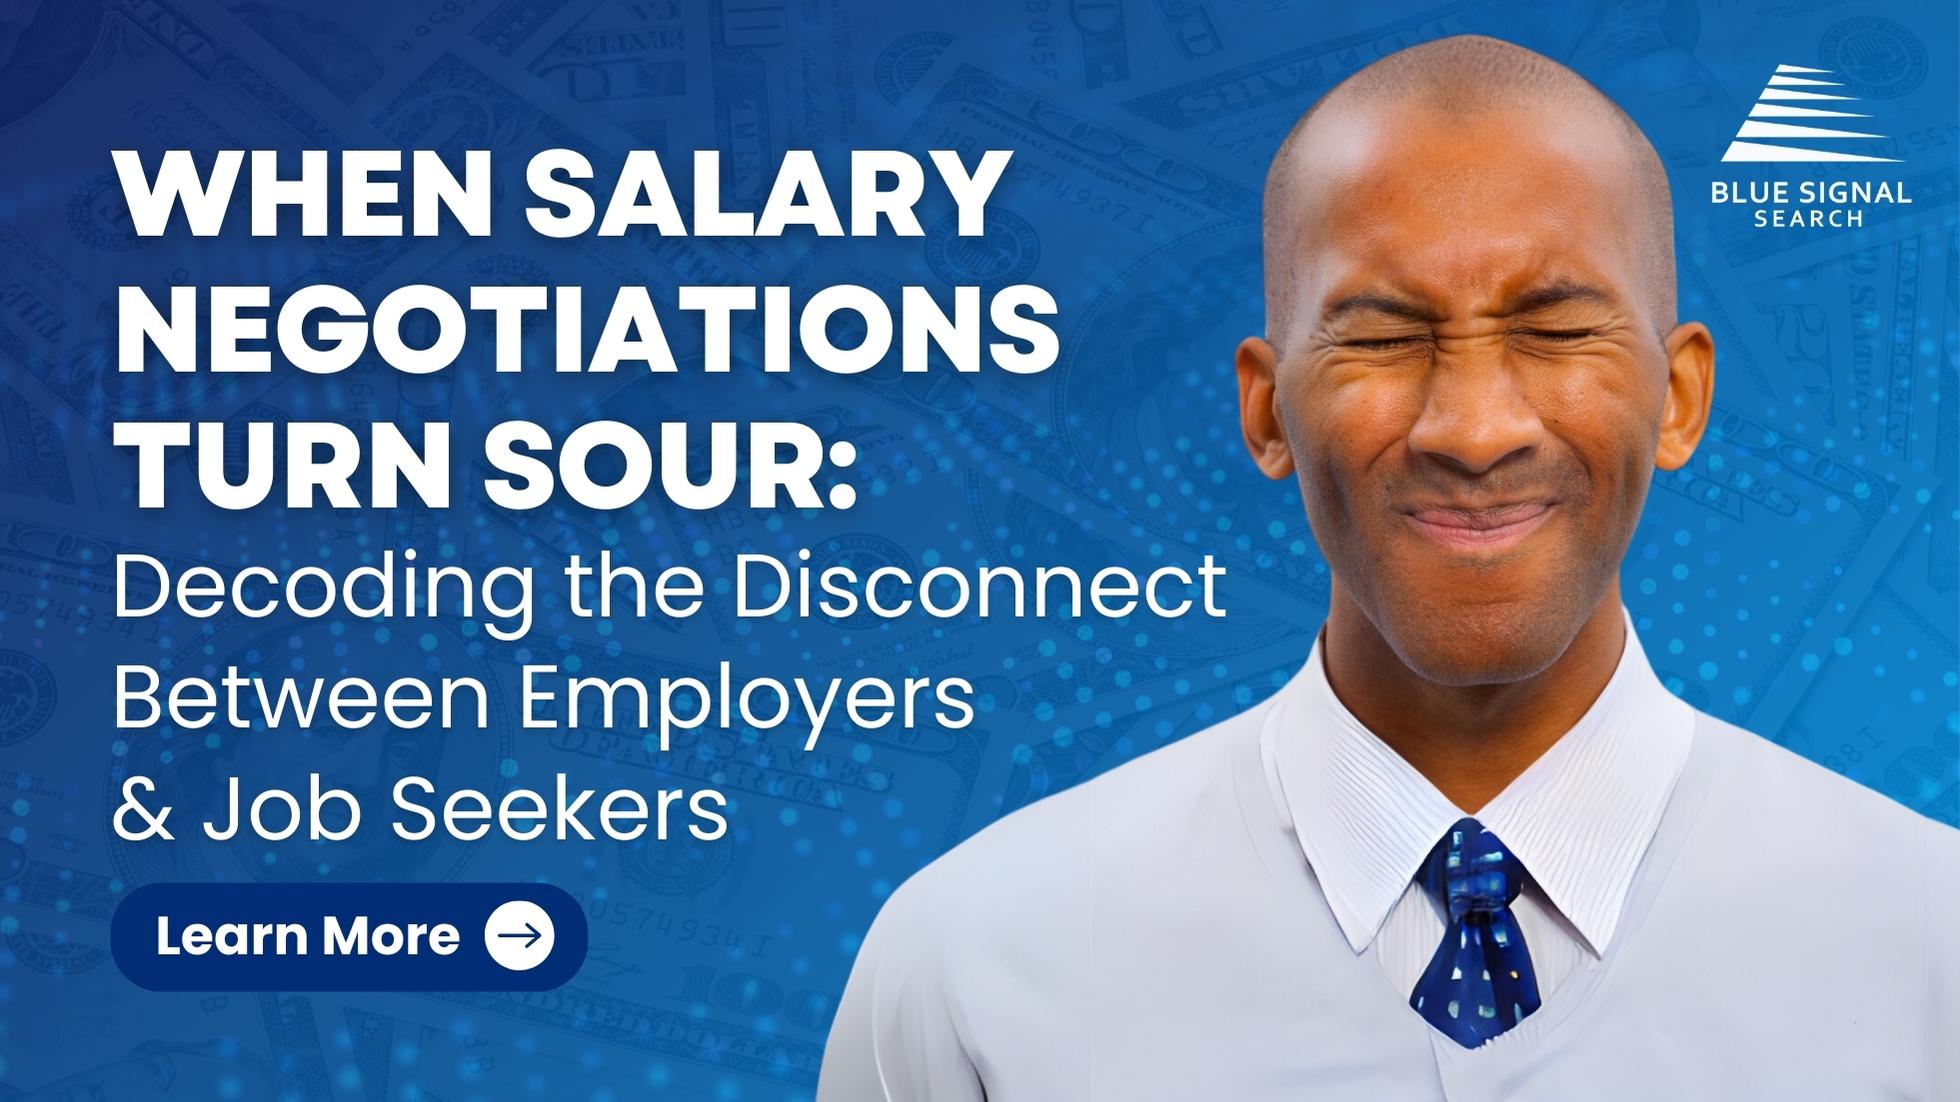 An African American man with a skeptical expression symbolizing the frustration during salary negotiations, with text about decoding the disconnect between employers and job seekers.